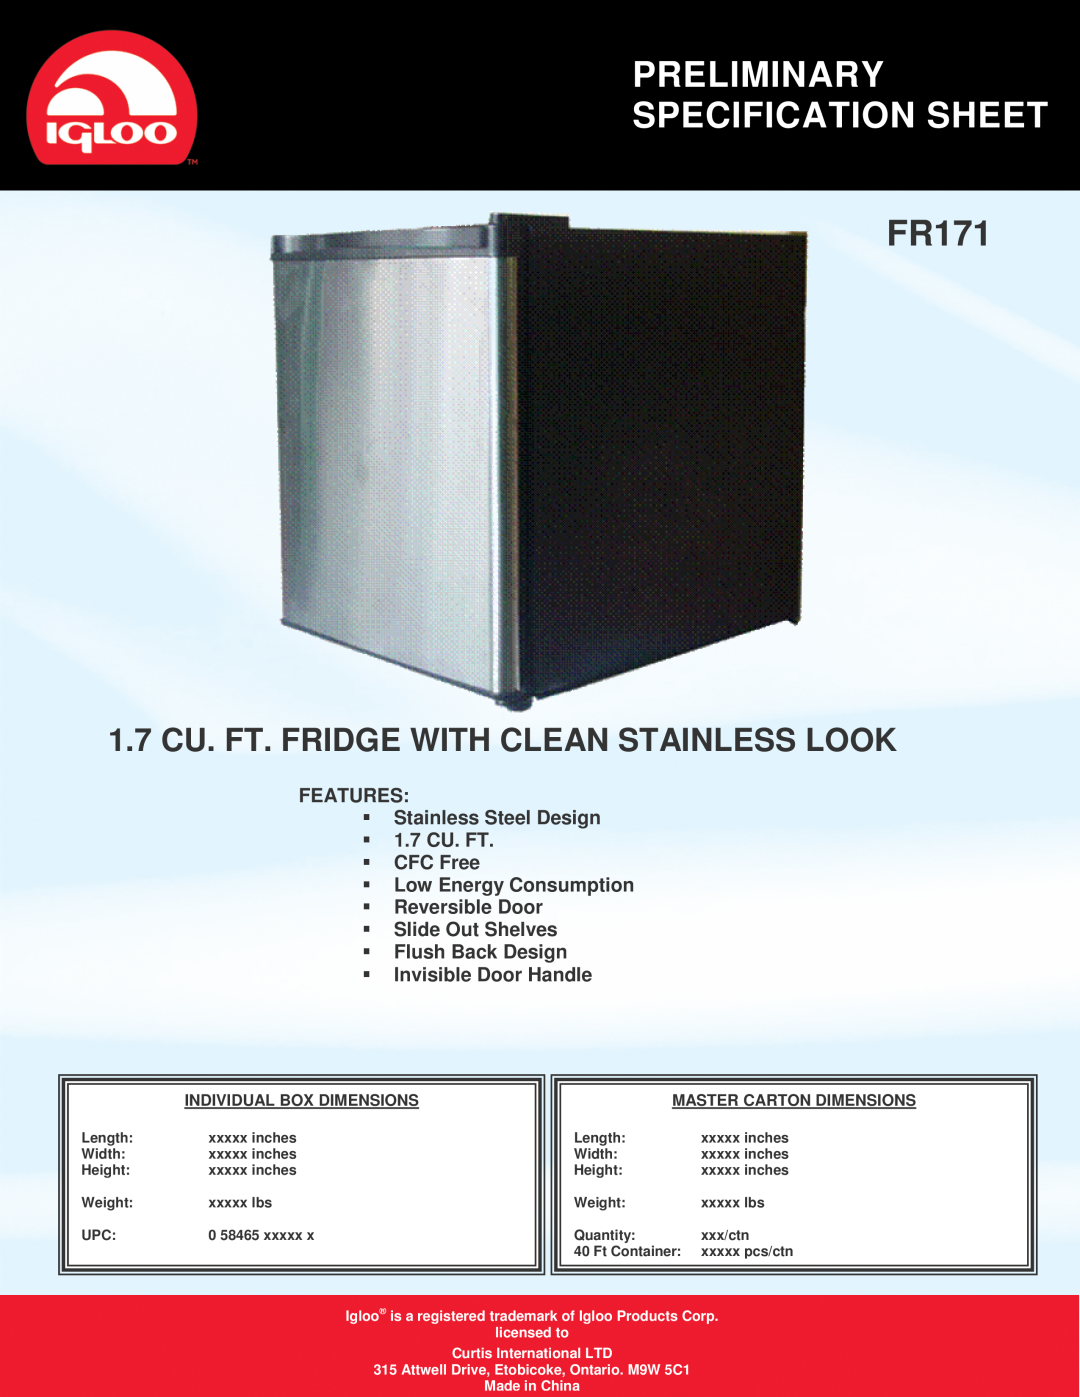 Curtis FR171 specifications Preliminary Specification Sheet, 1.7 CU. FT. FRIDGE WITH CLEAN STAINLESS LOOK, Made in China 